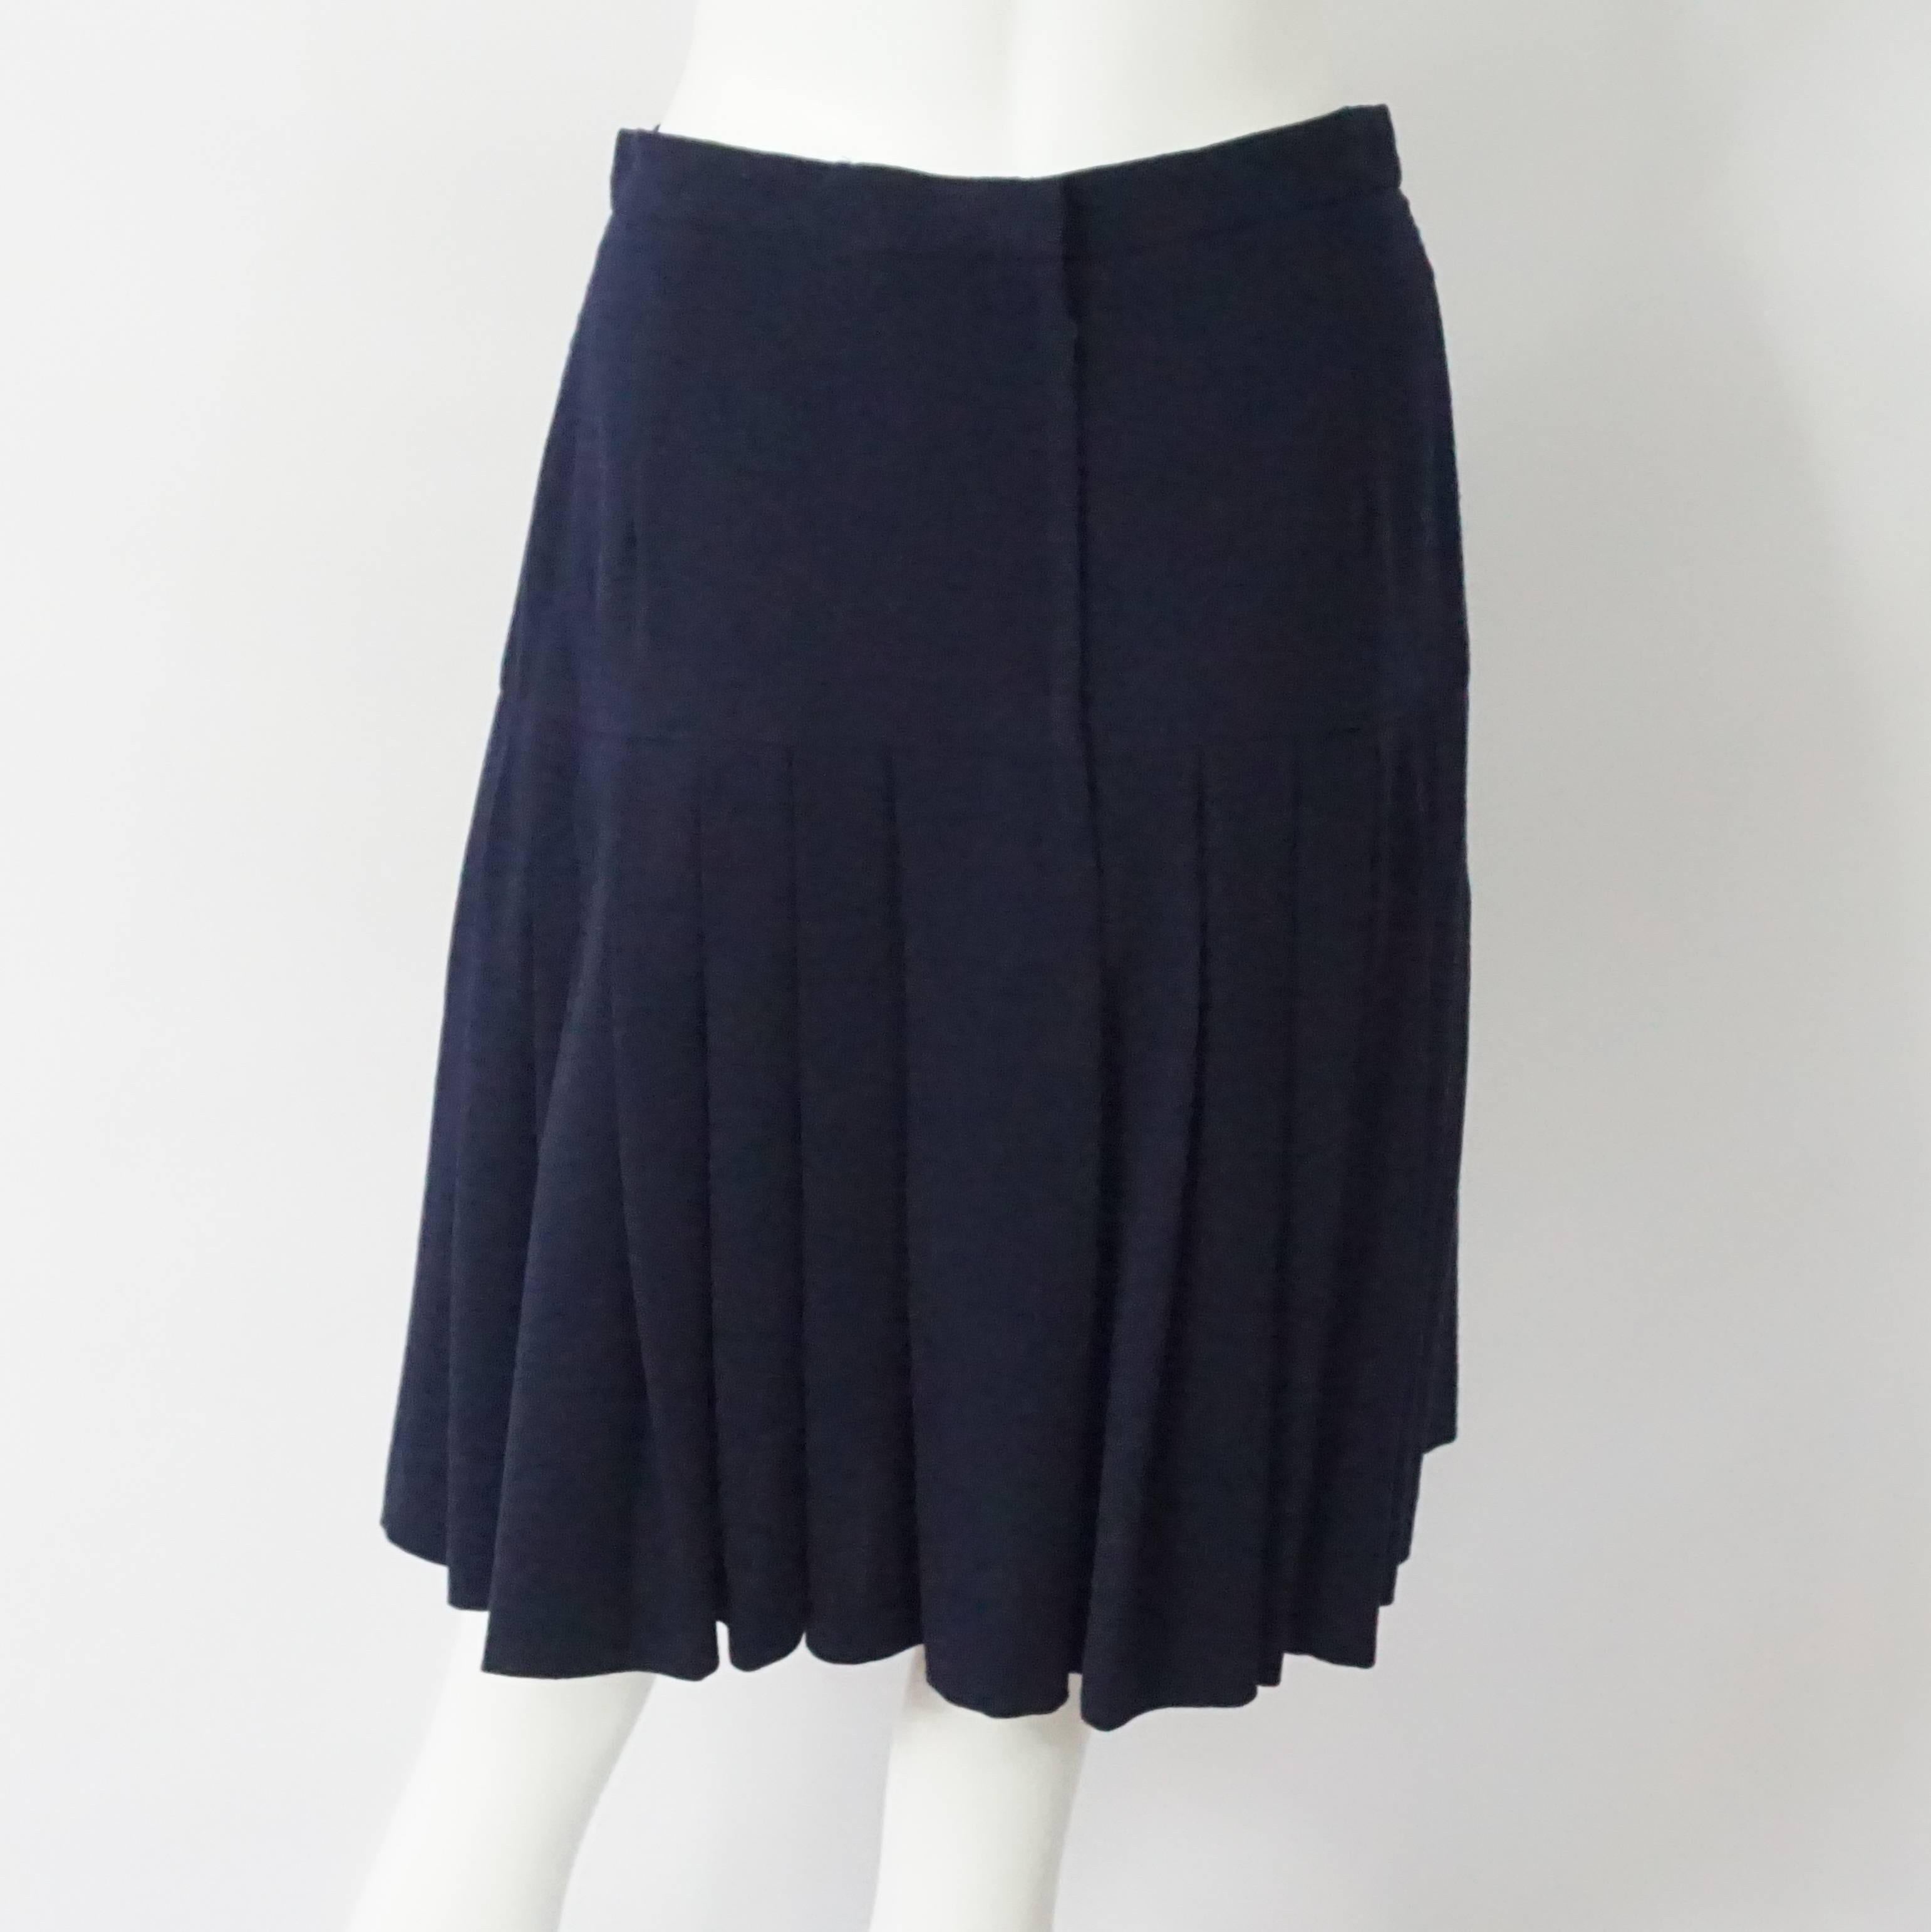 Black Chanel Navy Wool Pleated Skirt w/ white patent detail - 40 - Circa 80's